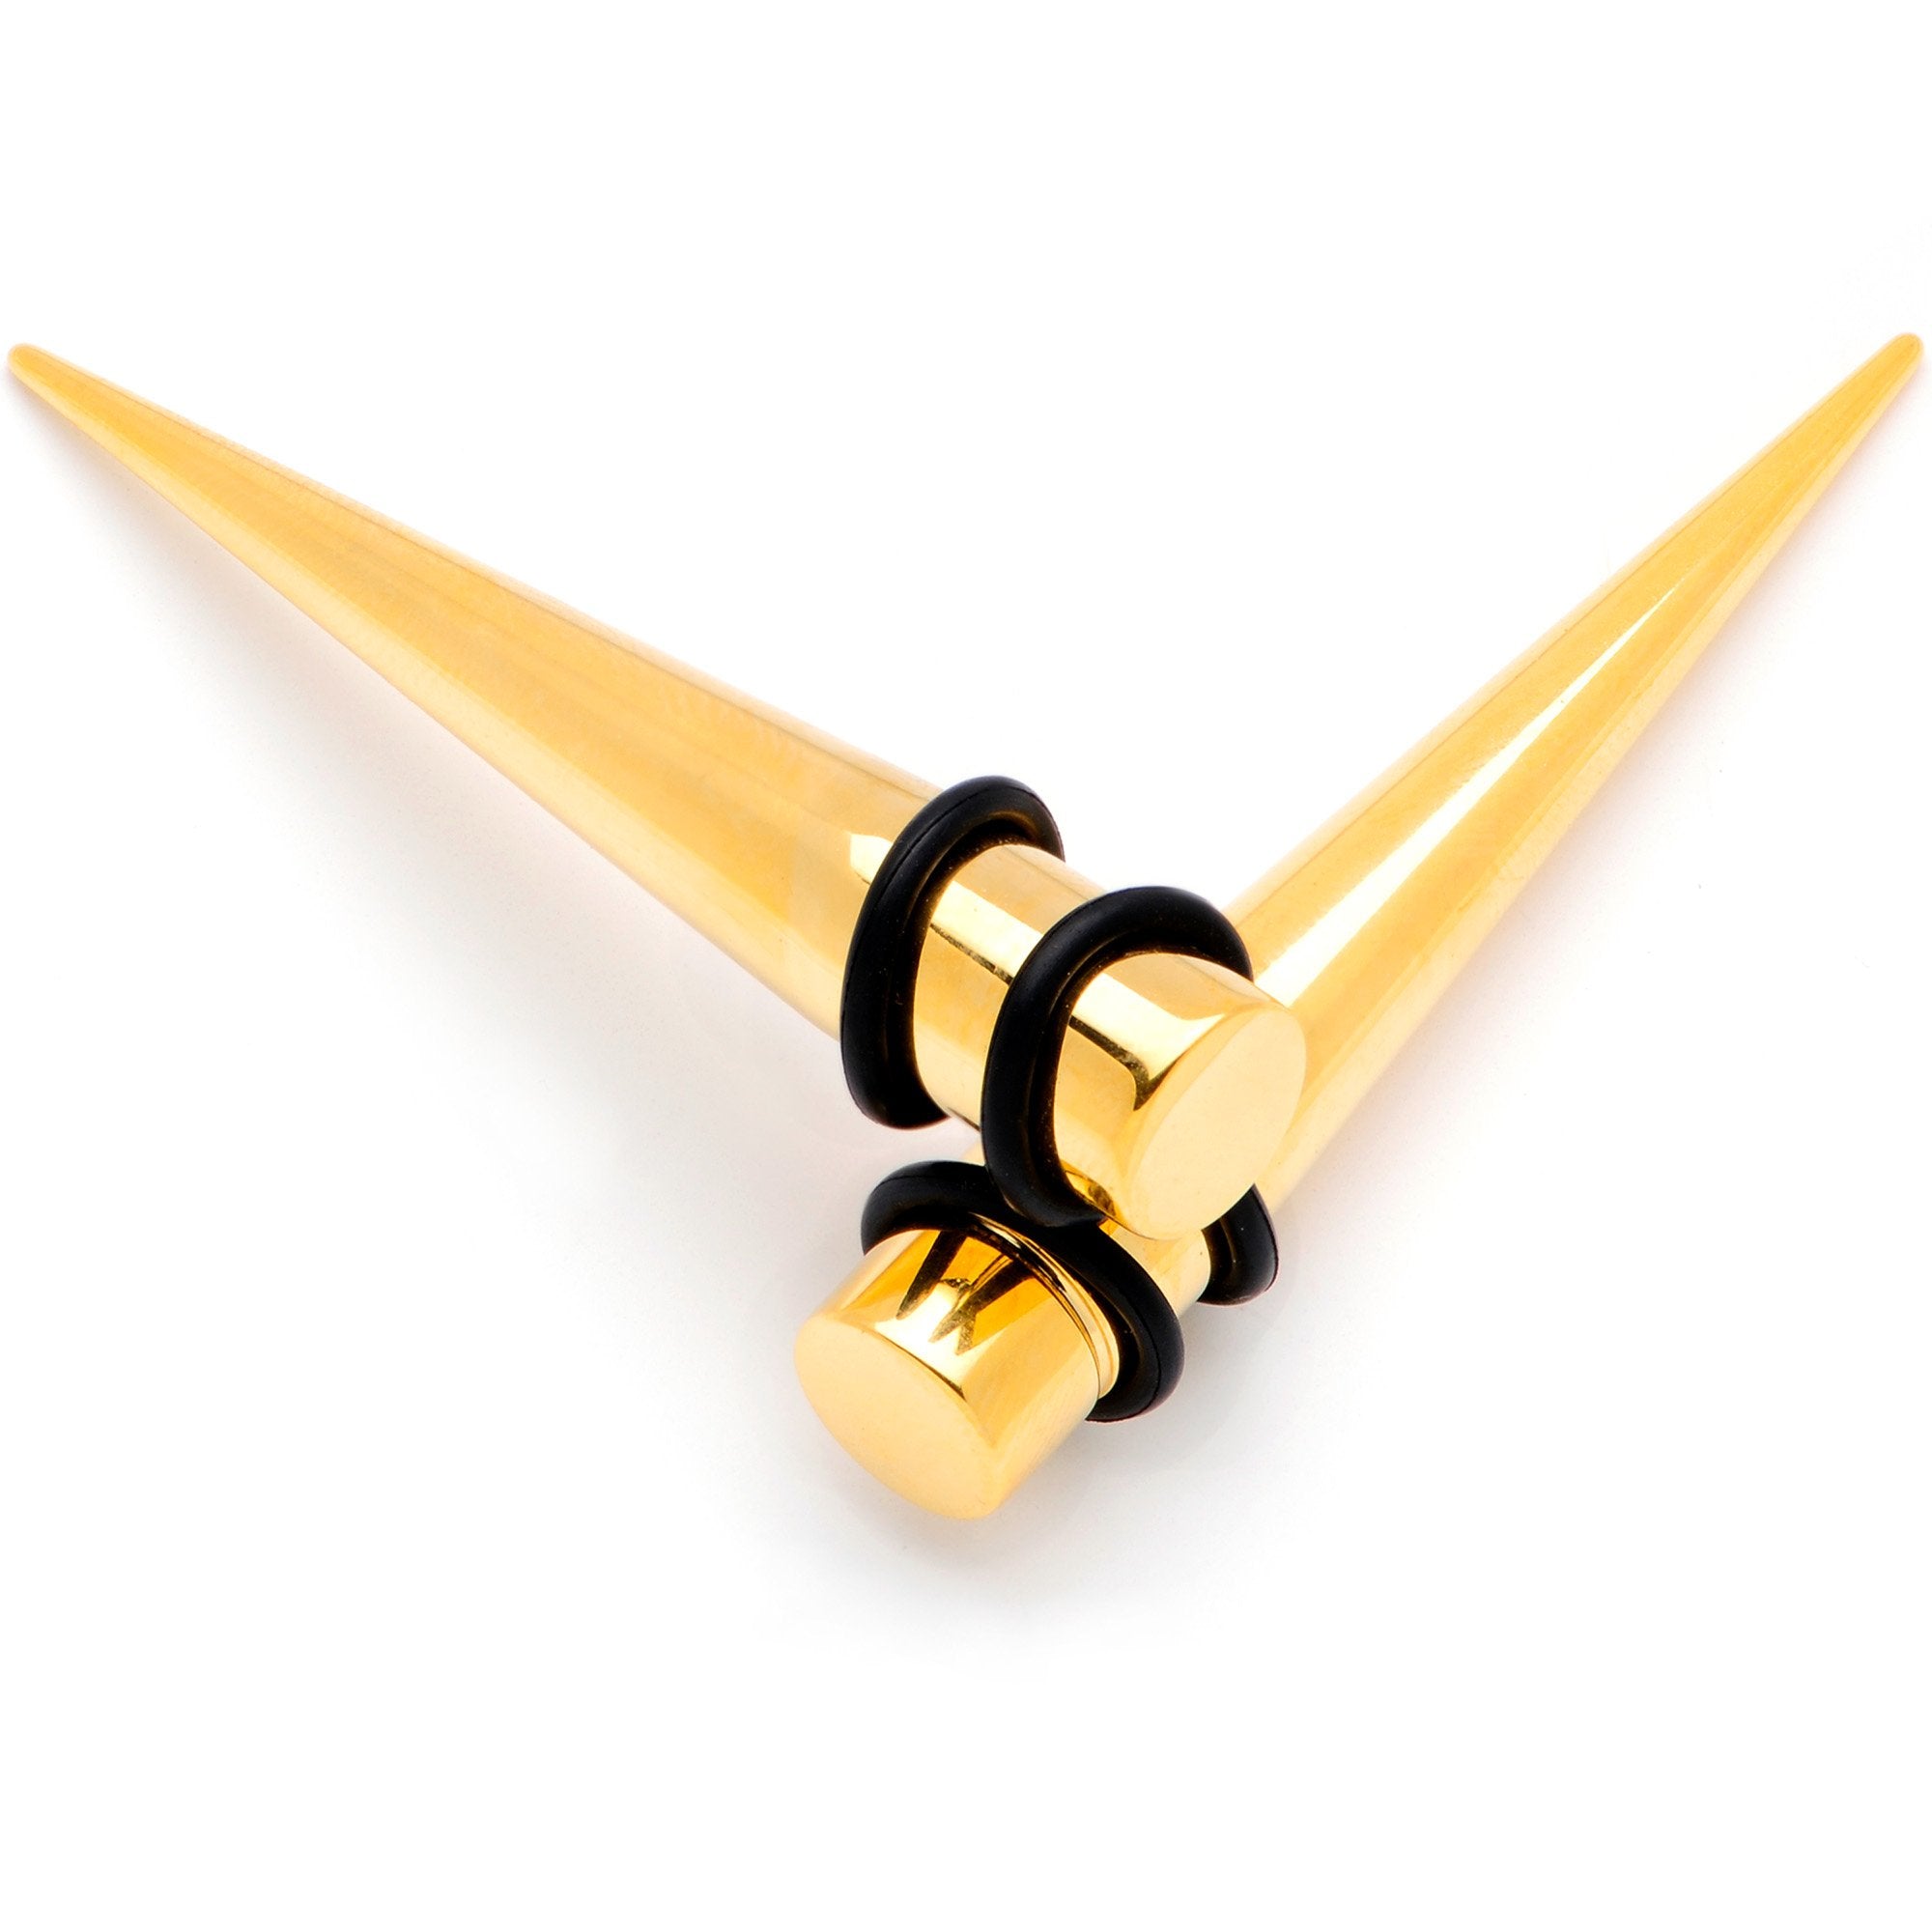 Gold Tone Anodized Straight Taper Set Available in Sizes  12 Gauge to 00 Gauge